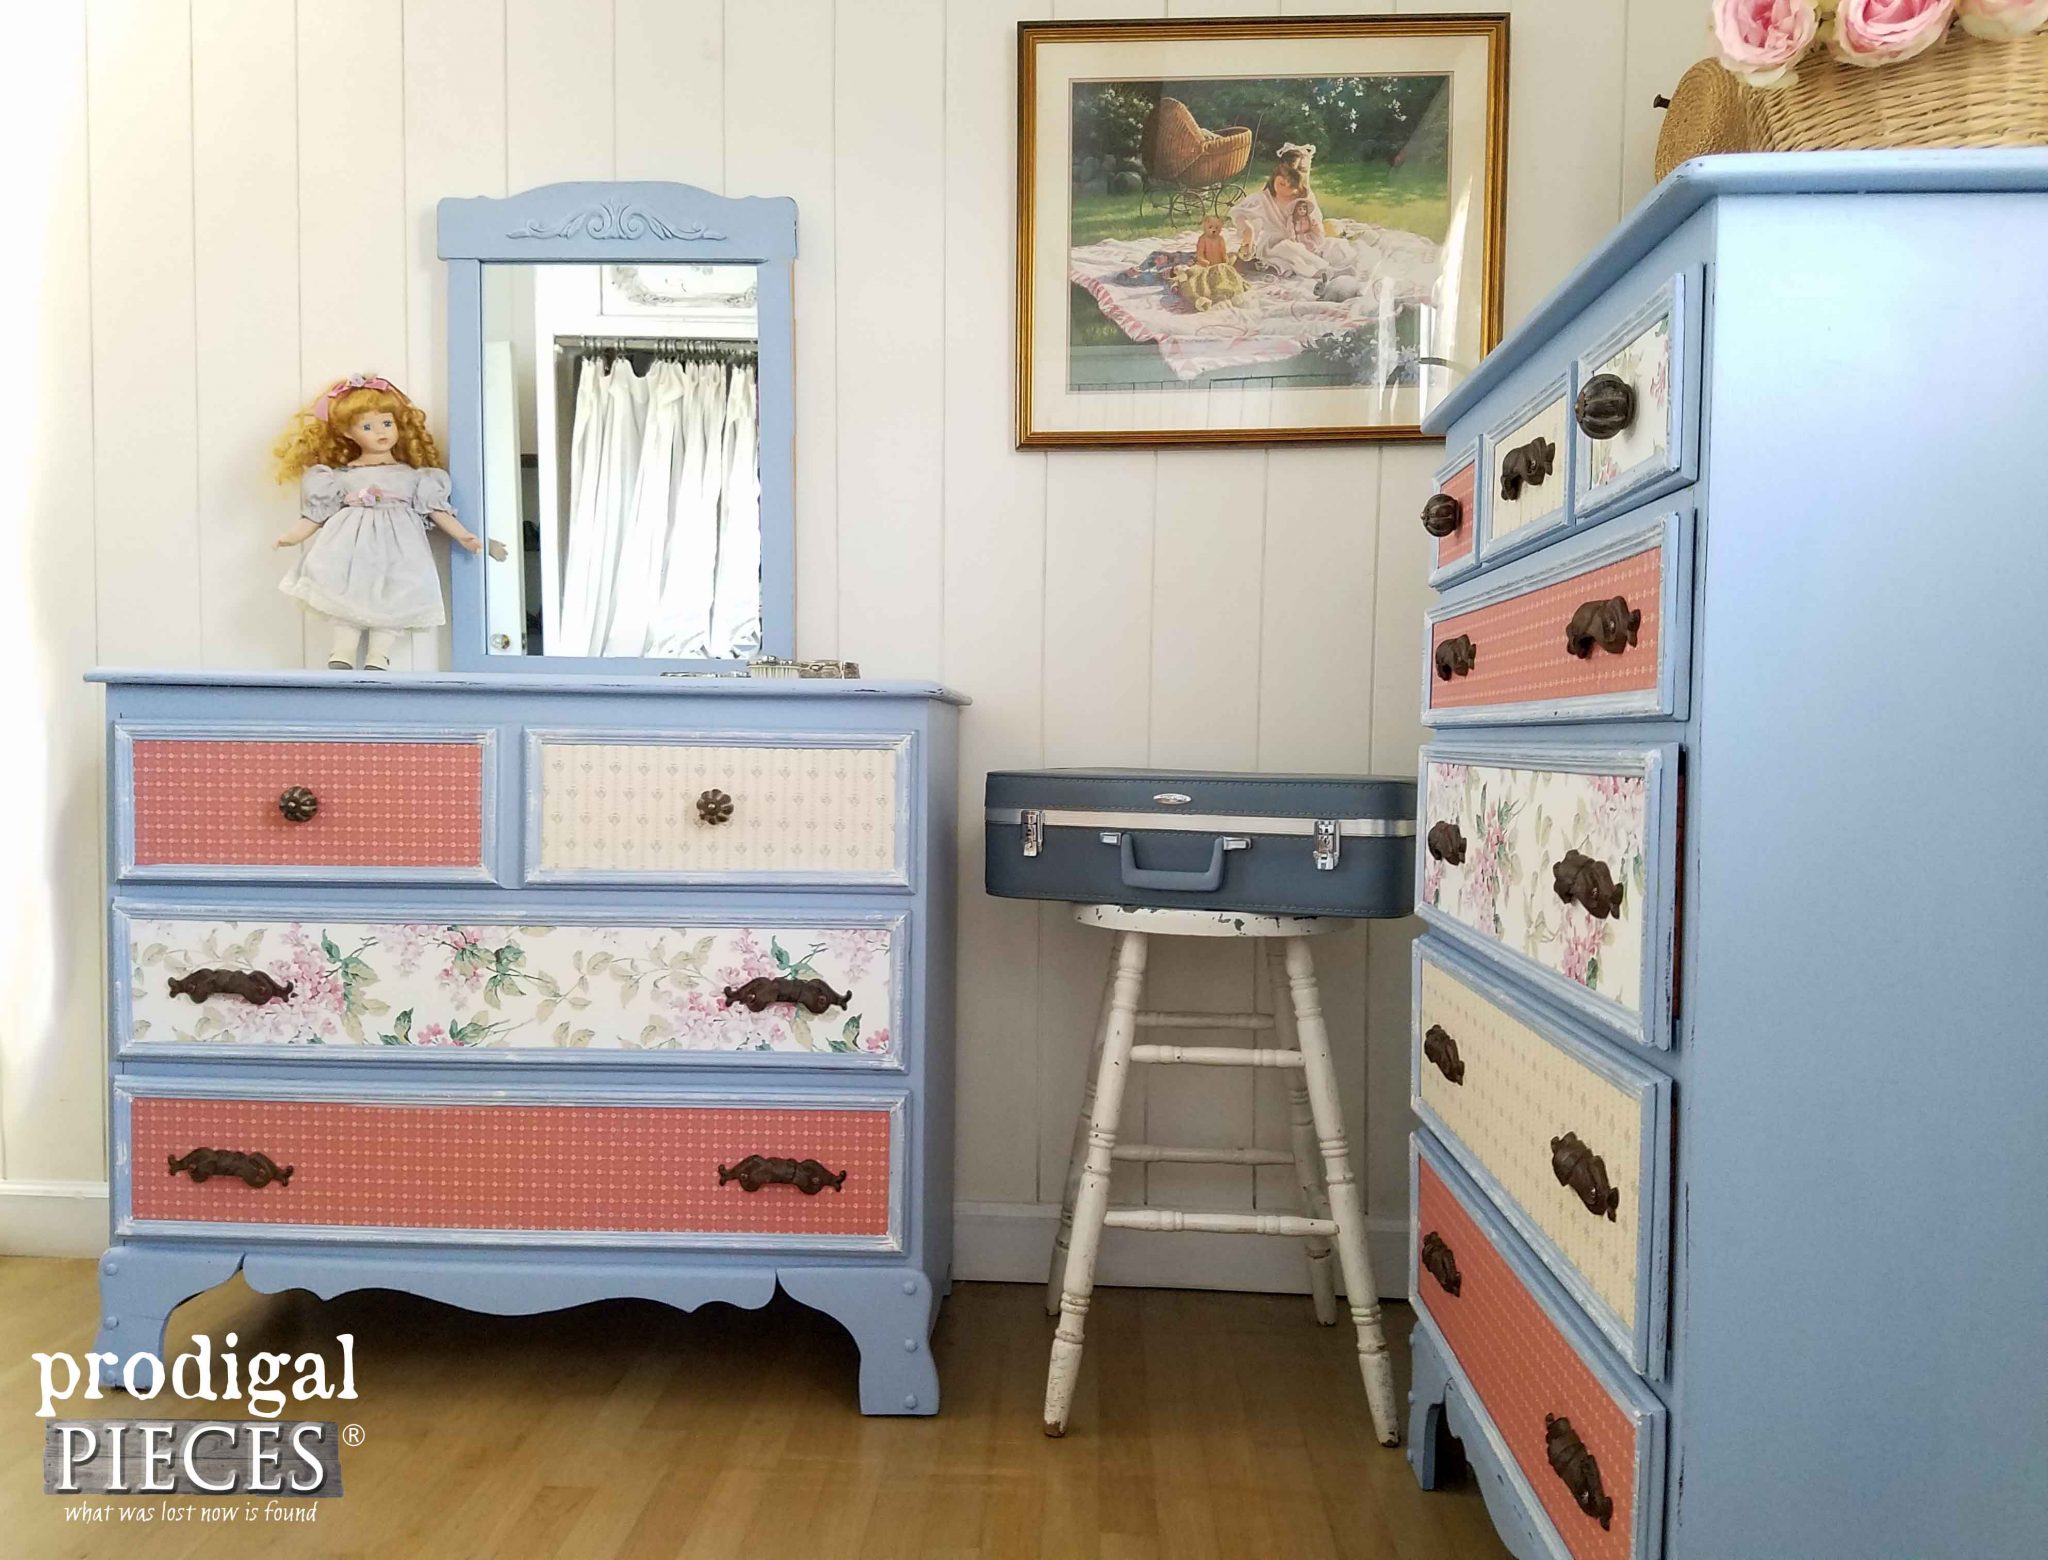 Cottage Chic Style Girl's Bedroom Set by Prodigal Pieces | prodigalpieces.com